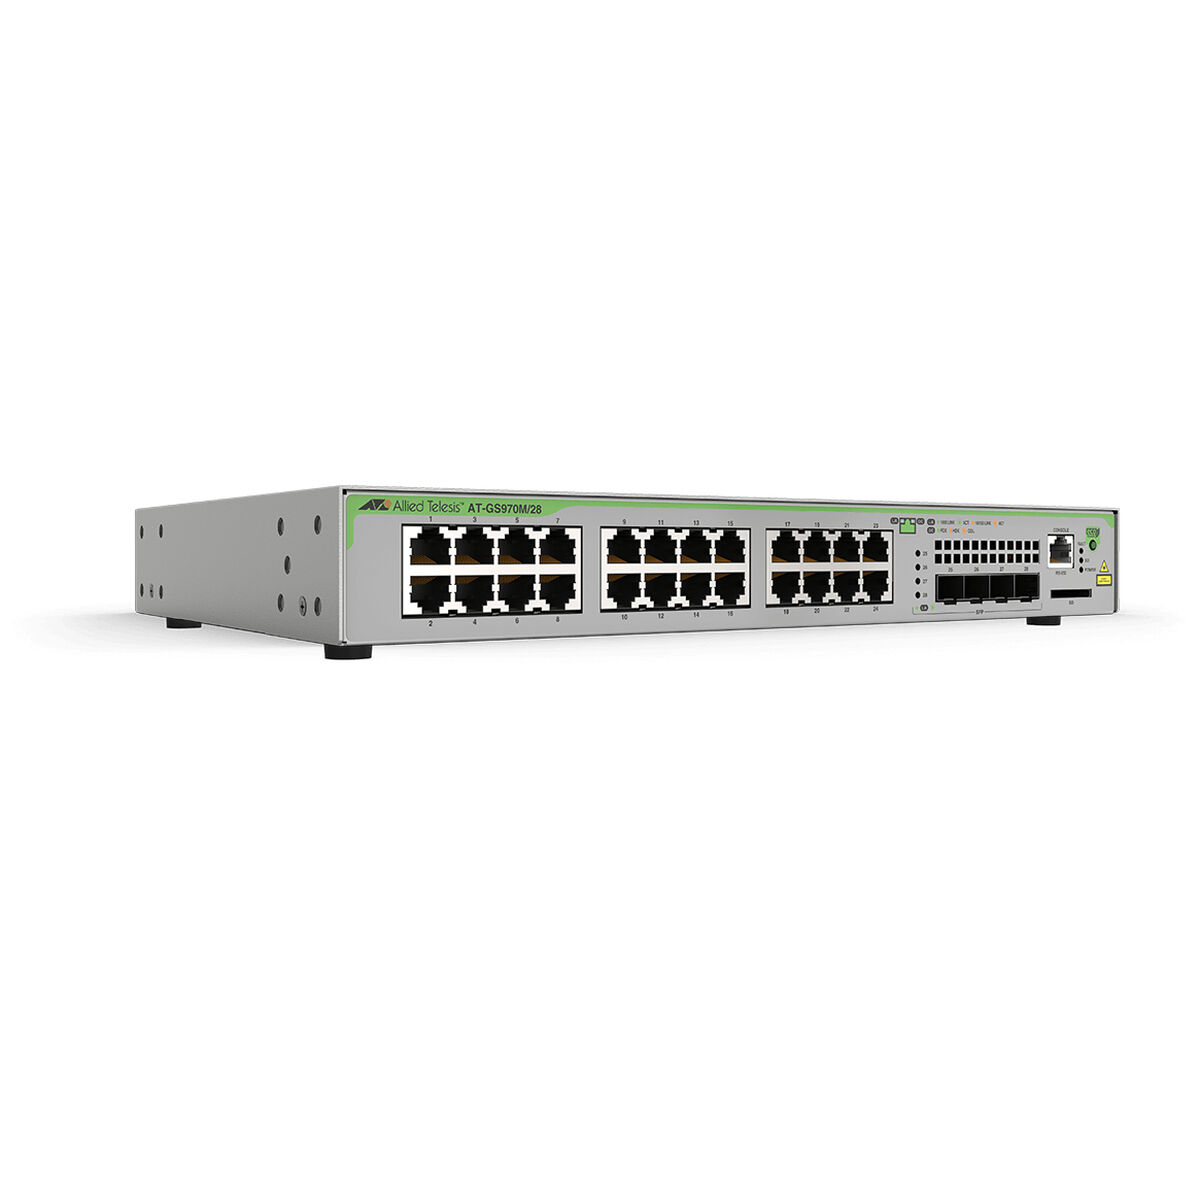 AT-GS970M/28PS TELESIS Switch ALLIED